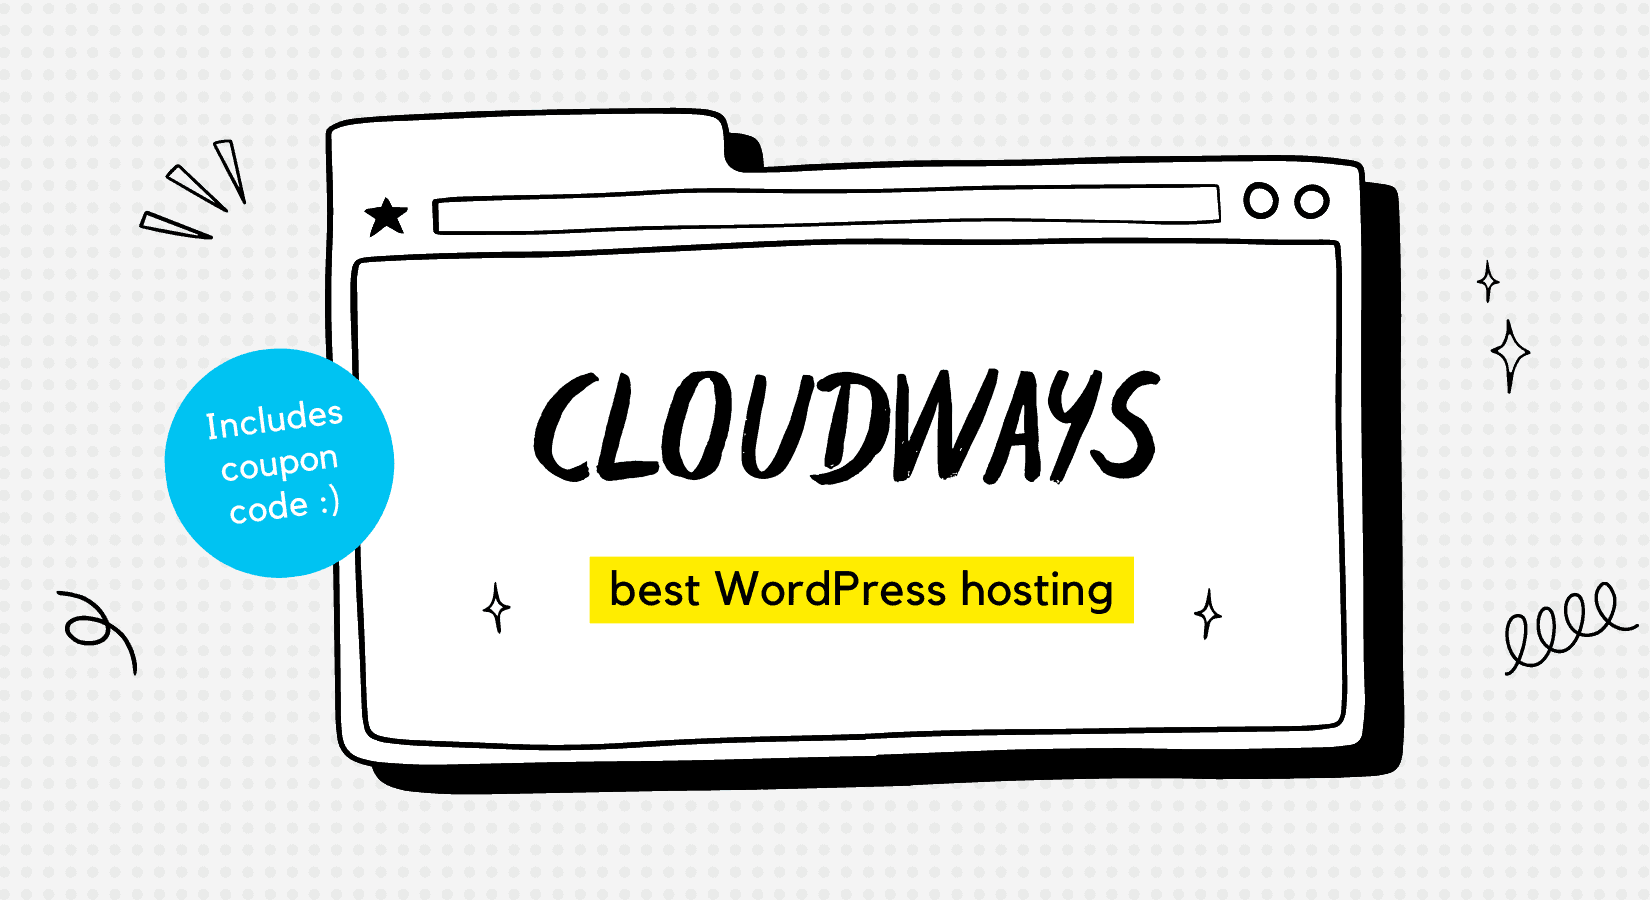 Why Cloudways is the Best WordPress Hosting Company